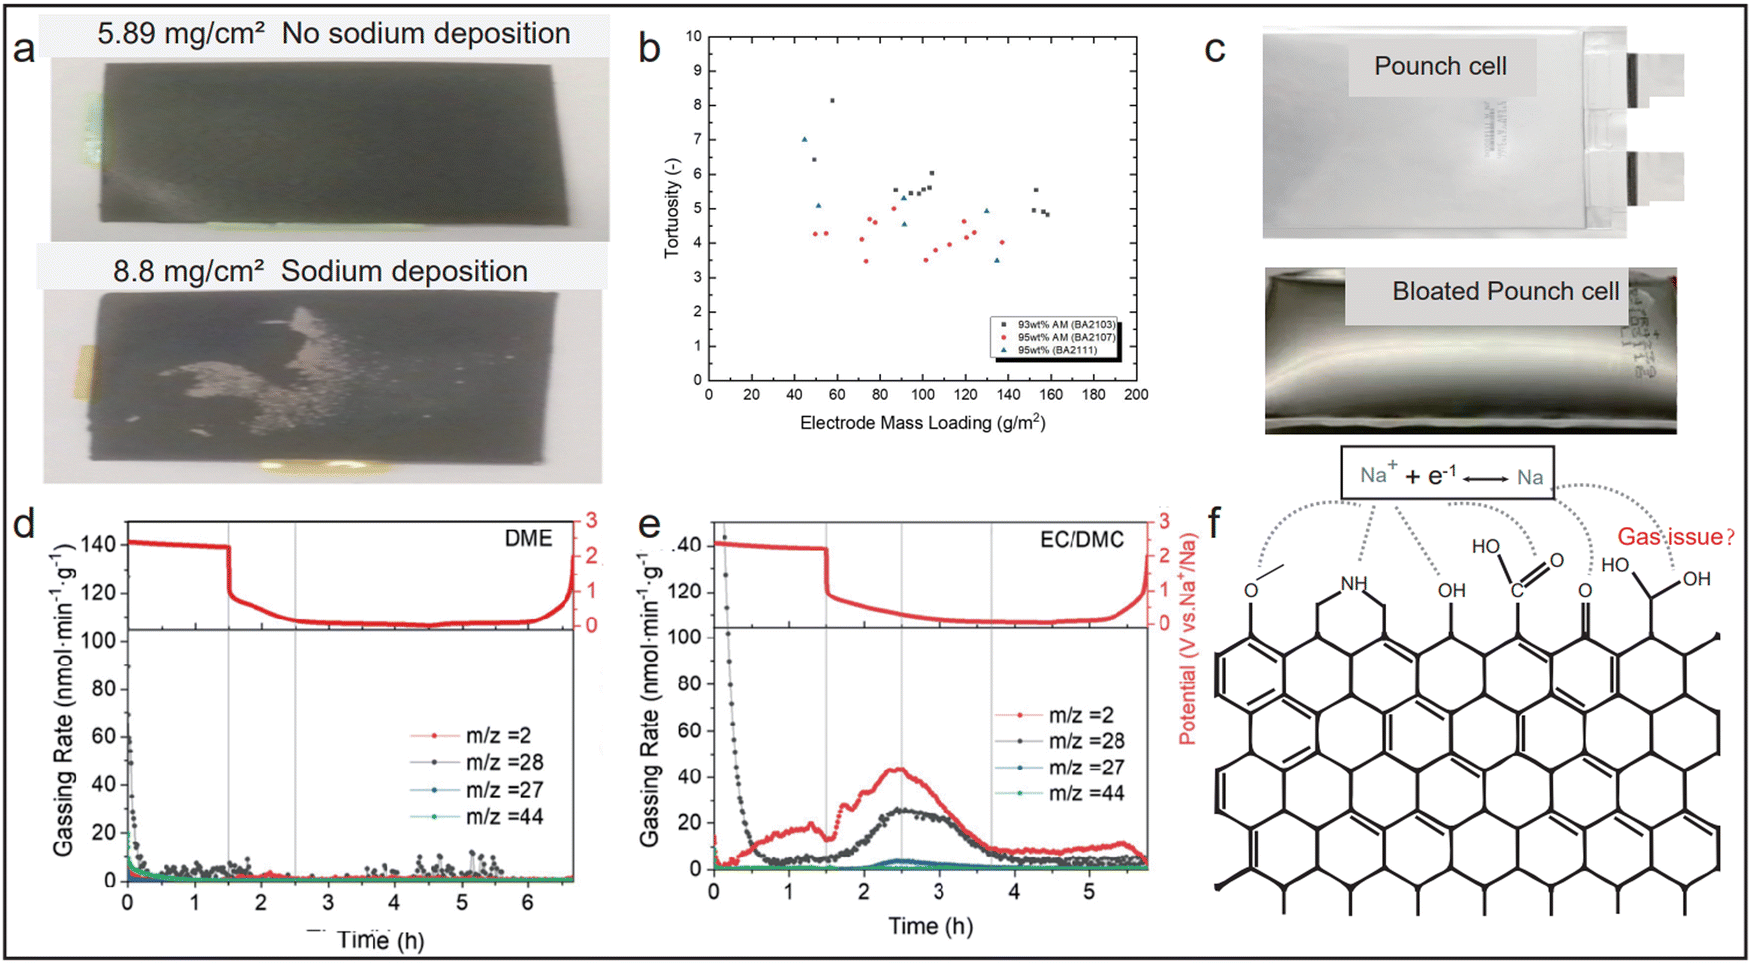 Reappraisal of hard carbon anodes for practical lithium/sodium-ion 